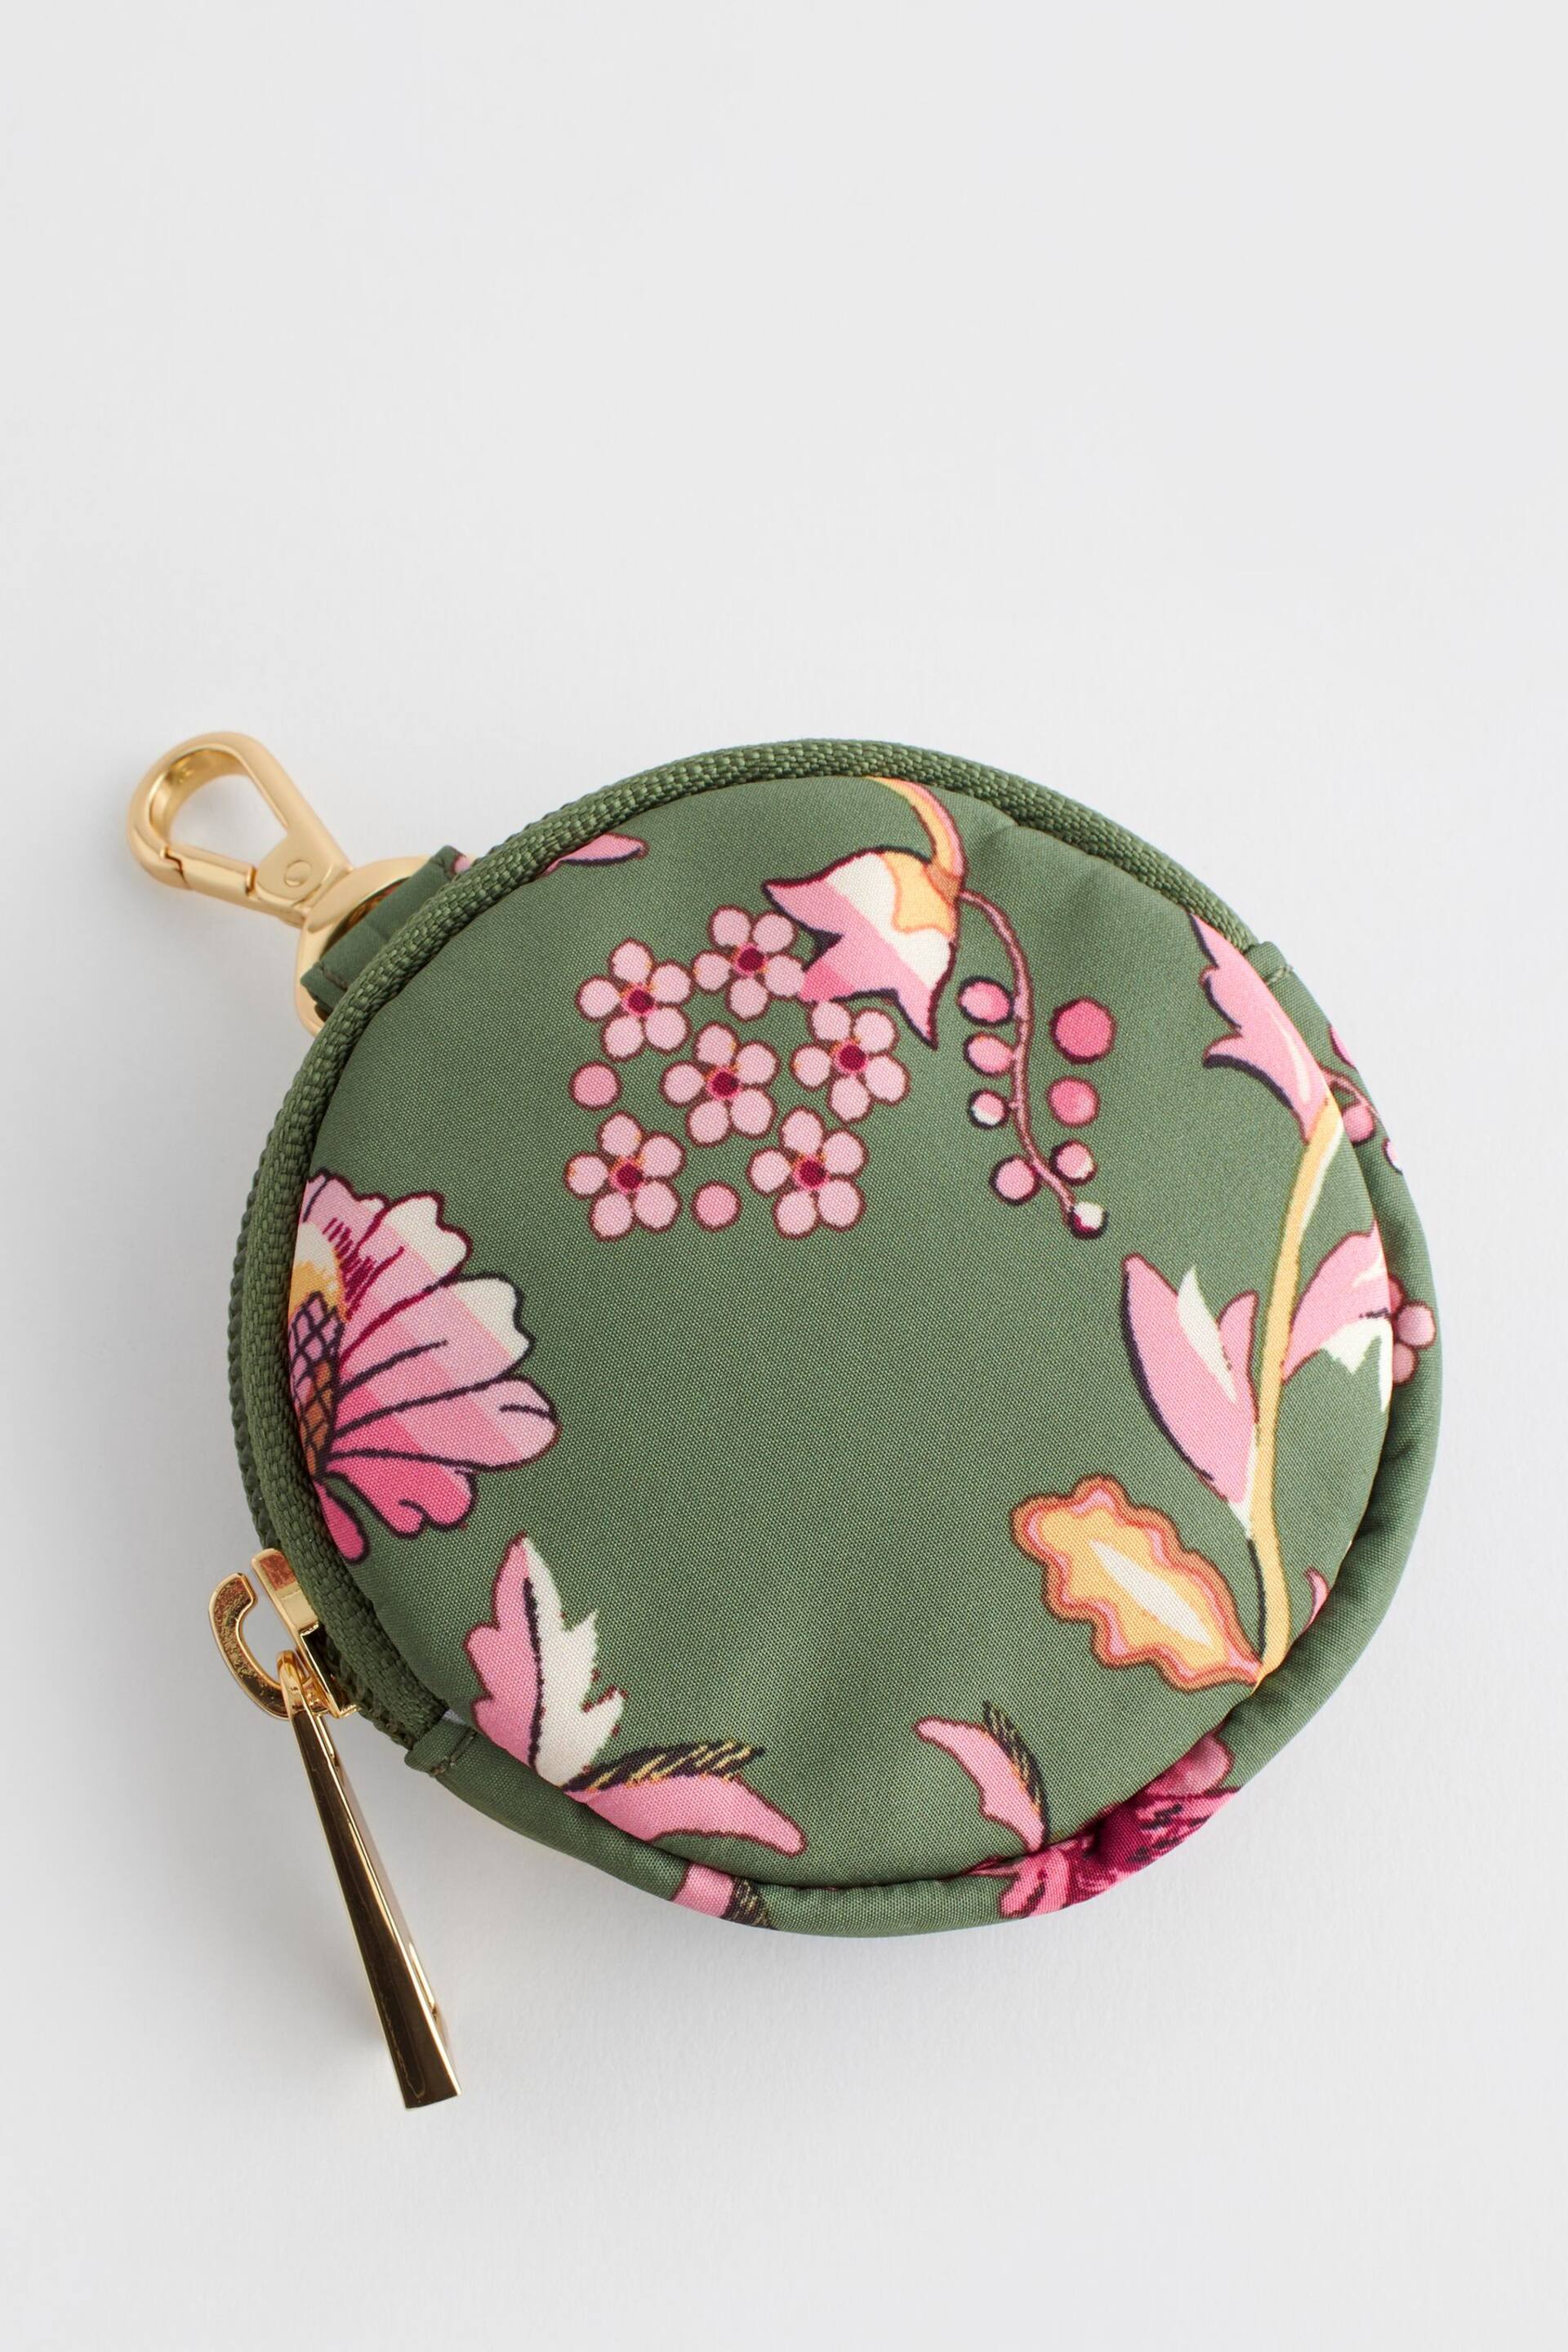 Cath Kidston Green Floral Round Coin Purse - Image 2 of 5